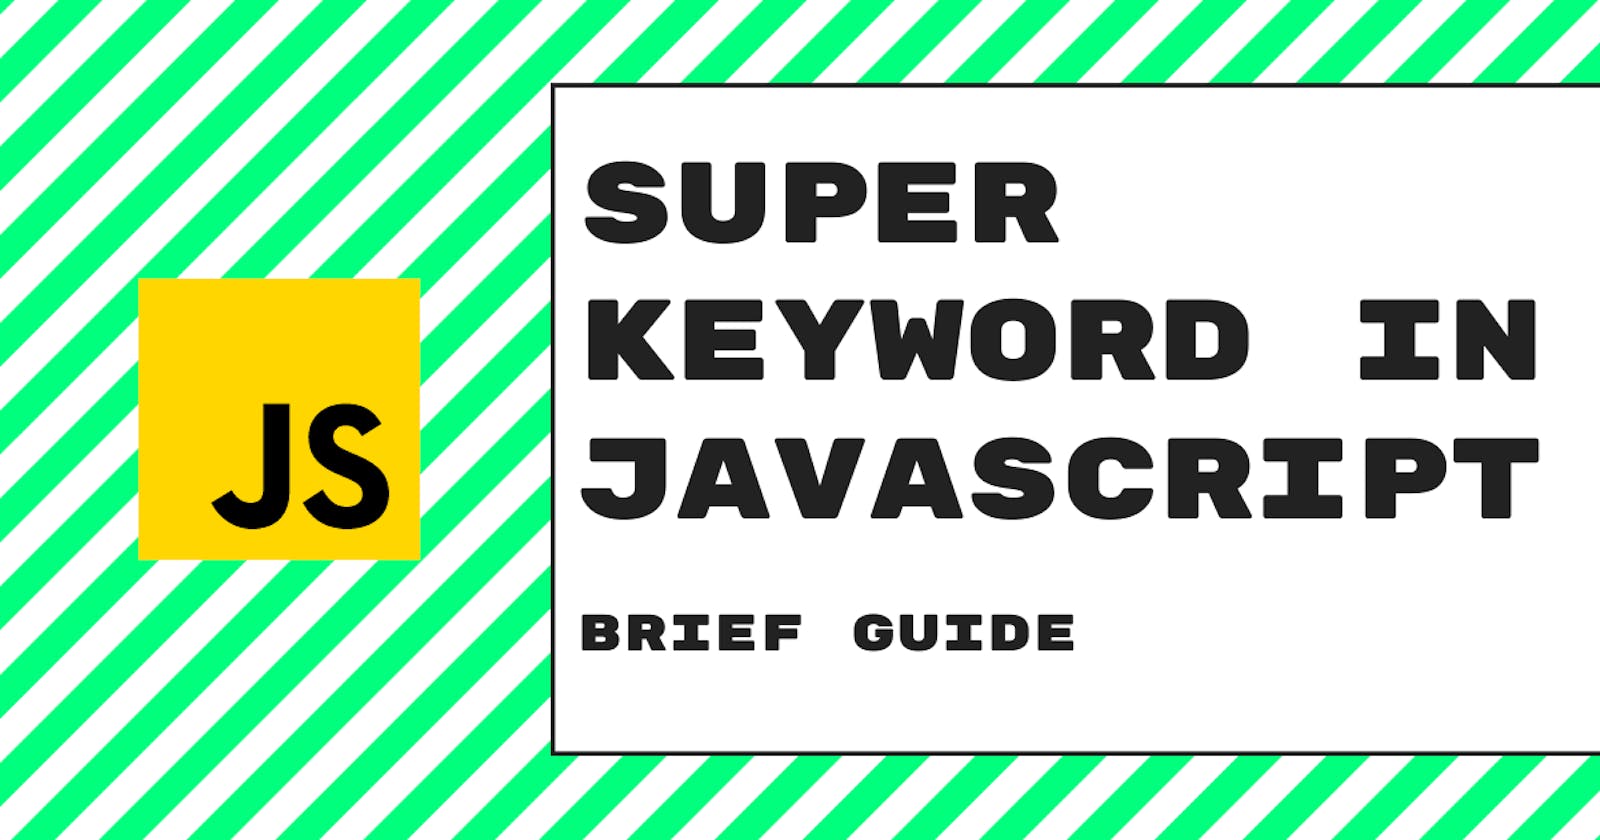 A brief guide to Super keyword in JavaScript